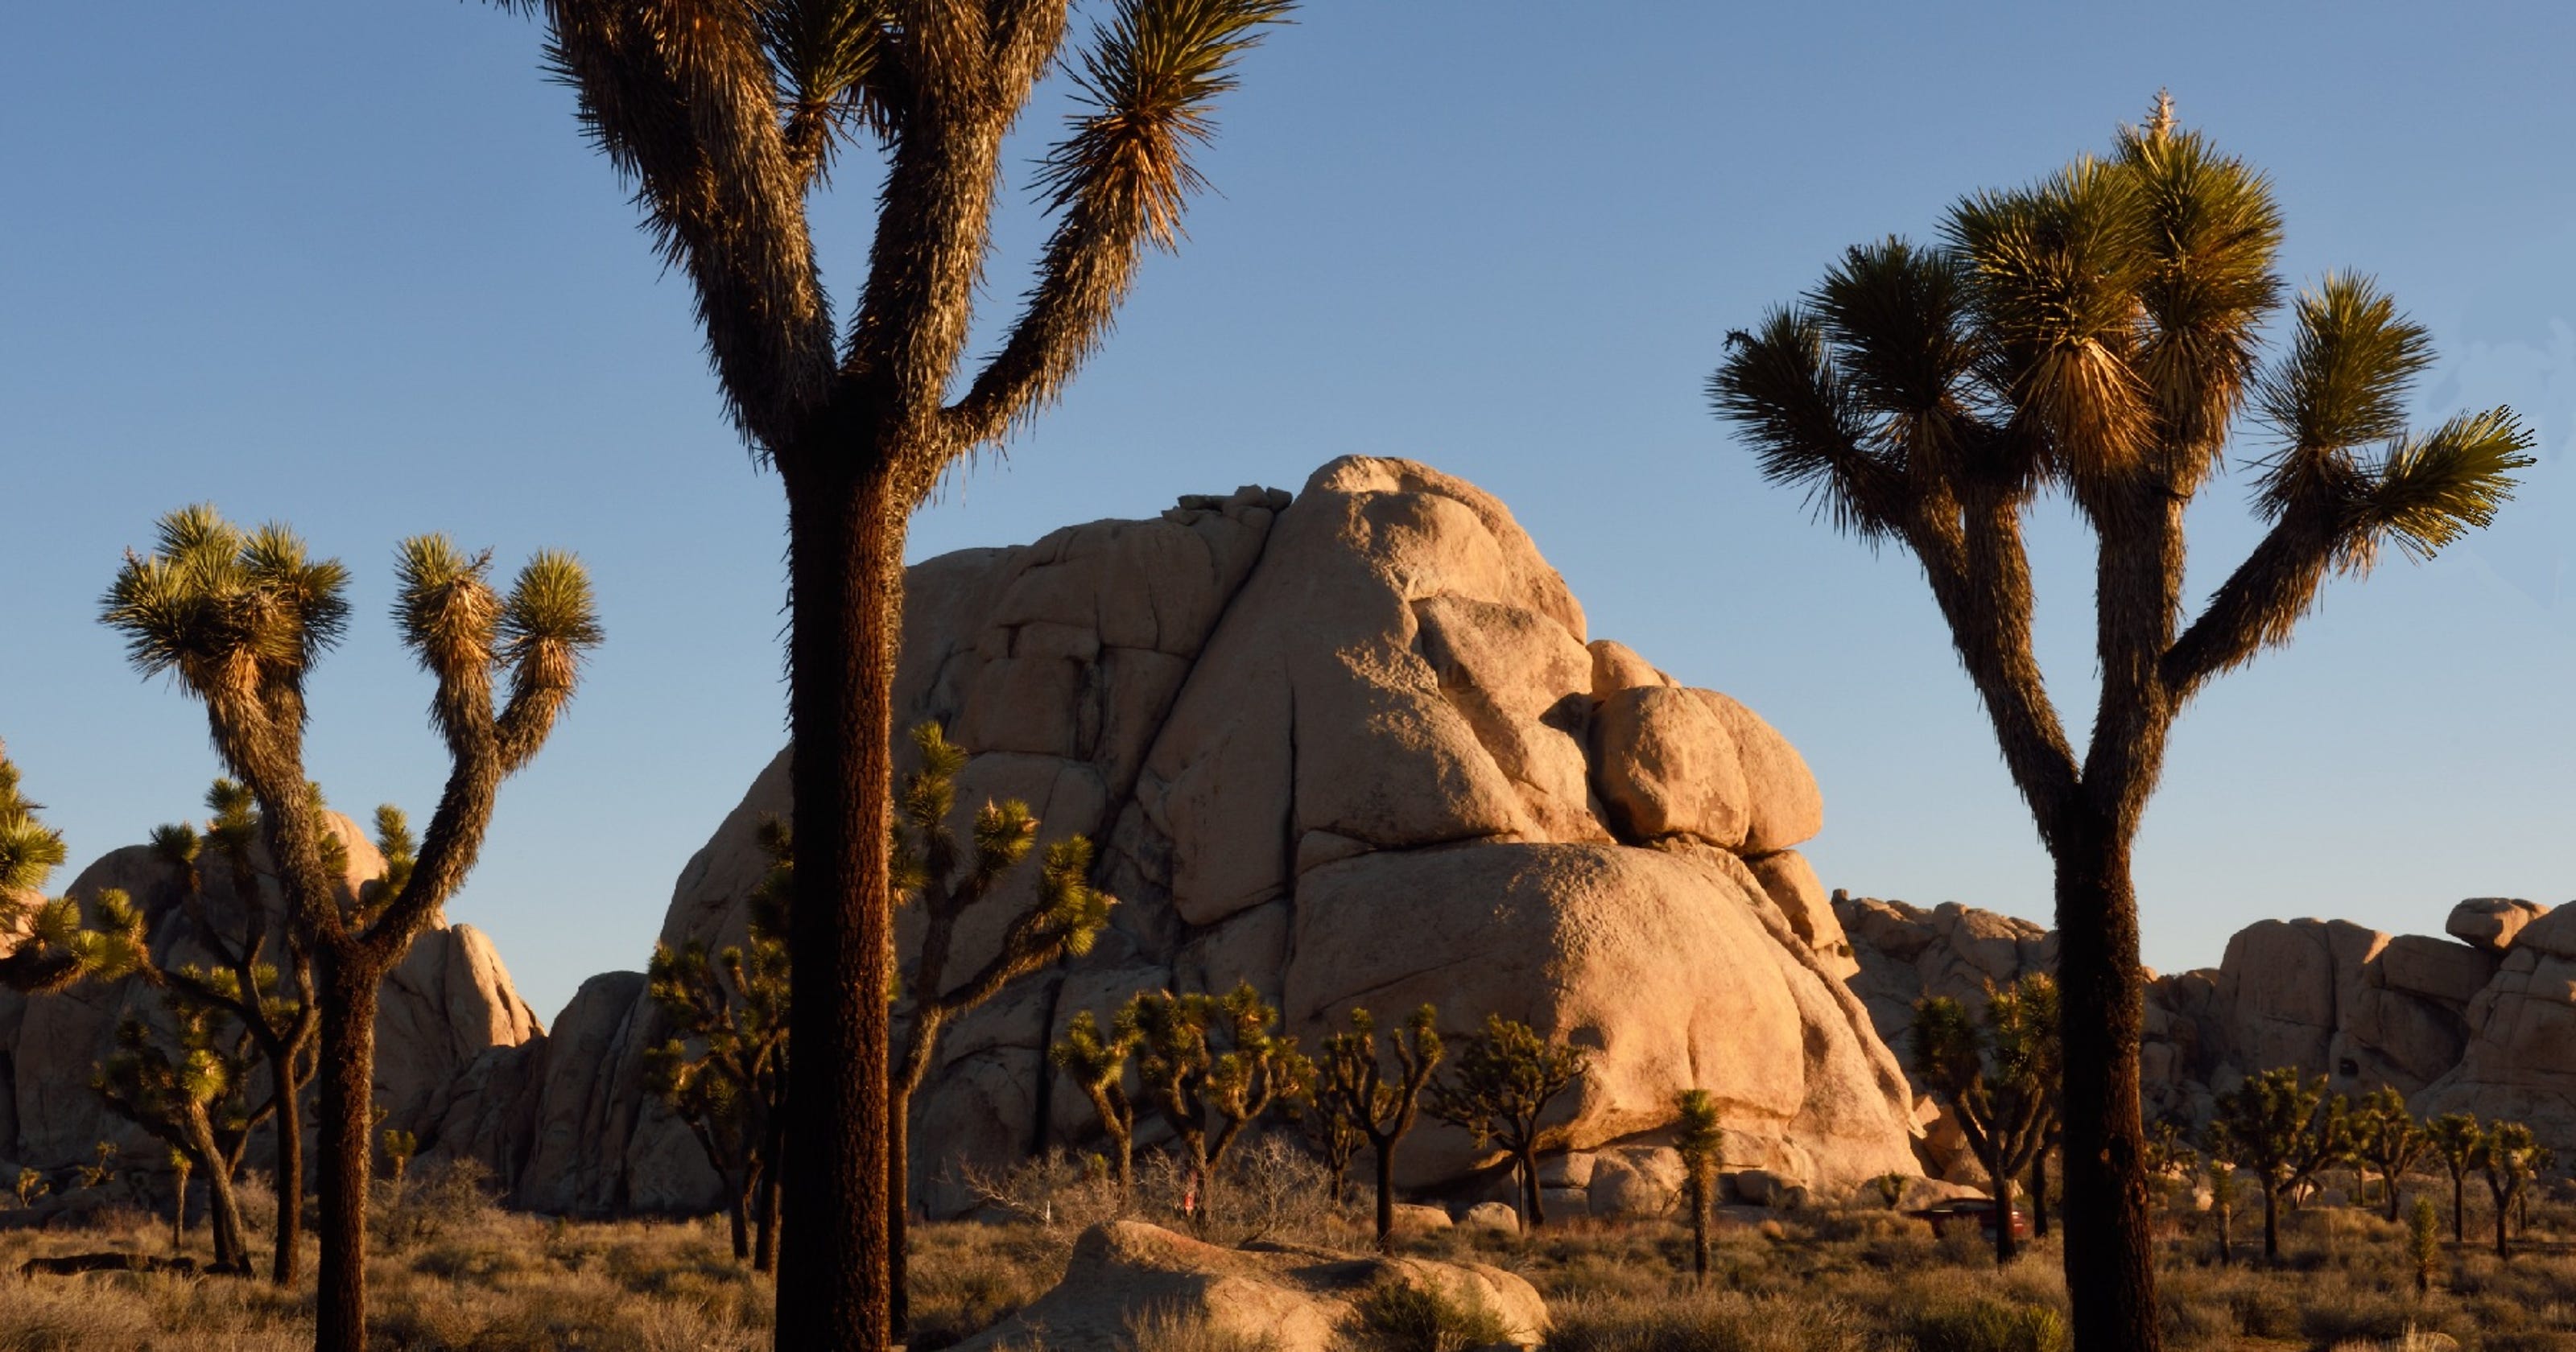 Joshua Tree National Park sets record; wildflowers make for busy March